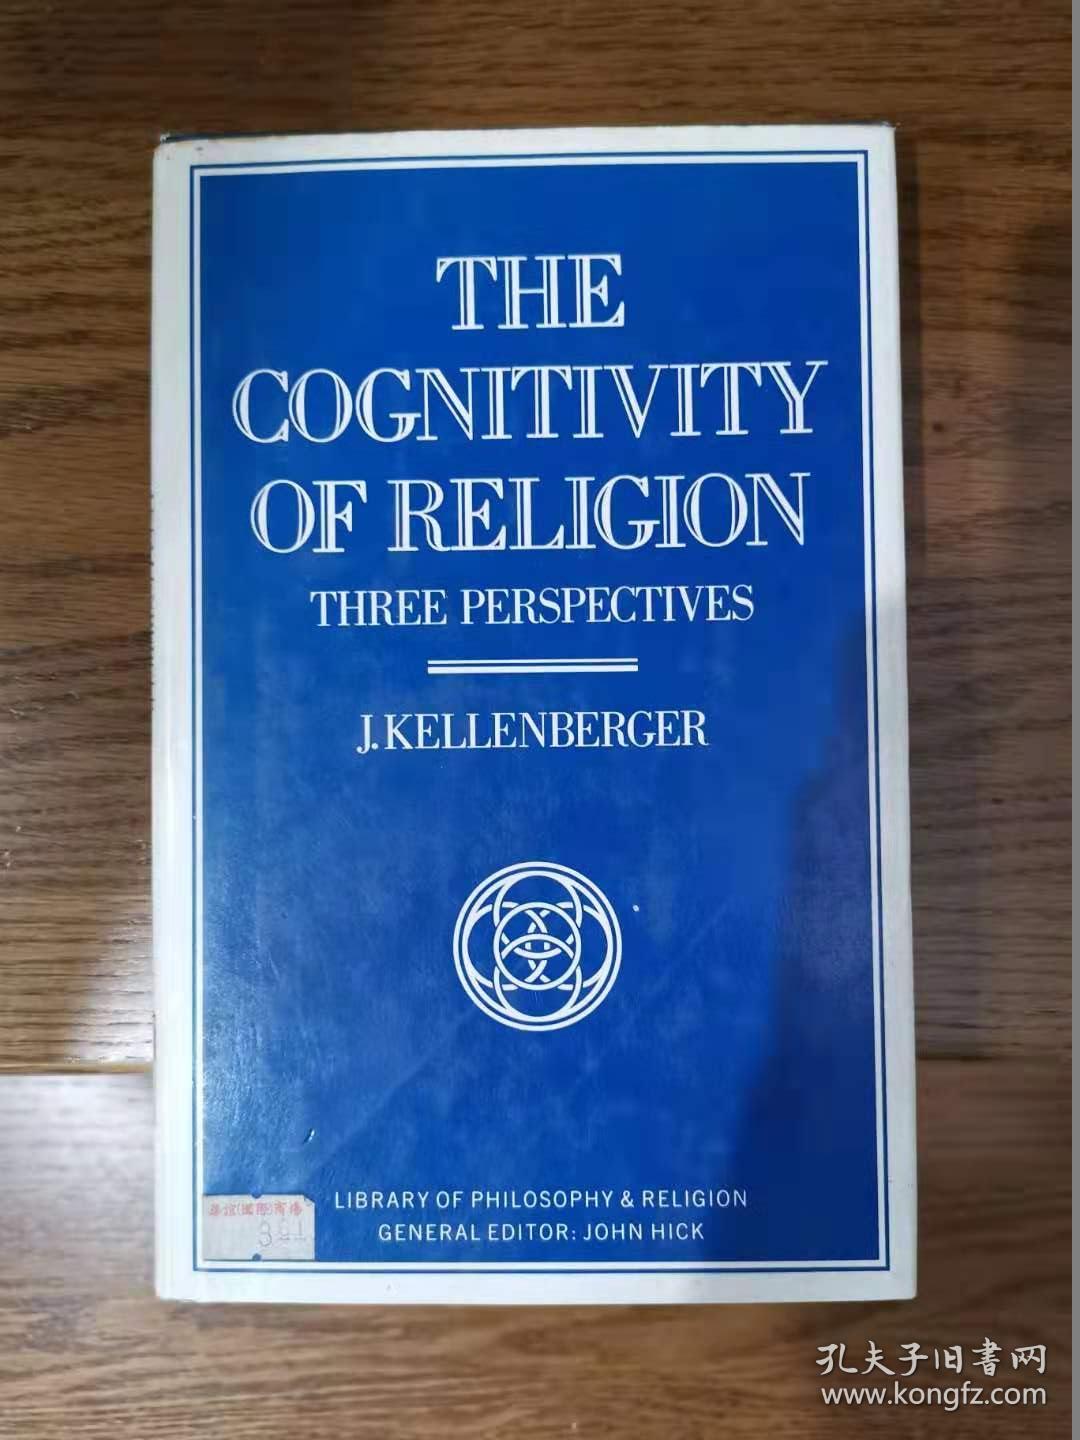 The Cognitivity of Religion: Three Perspectives